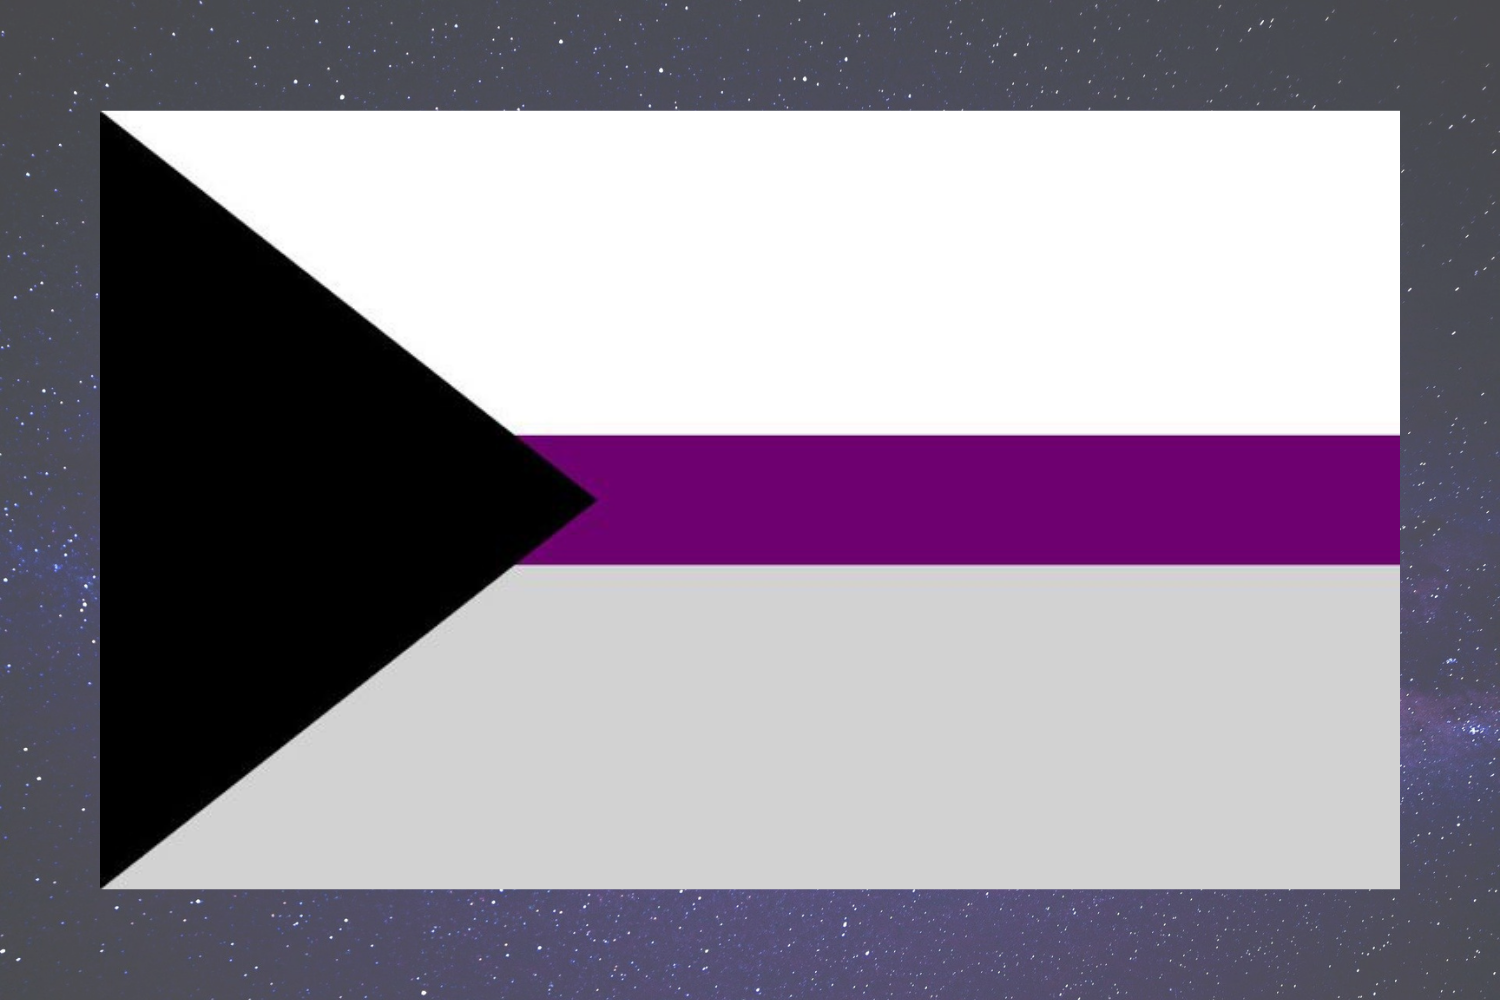 The Demisexual Flag - An adaptation of the asexual flag to specifically represent demisexual people. A flag with a black triangle on the left pointing toward the center with three horizontal stripes: top to bottom: white, dark purple, and grey. The black arrow represents the wider asexual community, the grey representing the grey-asexuality community, with the white representing sexuality and the purple representing community.